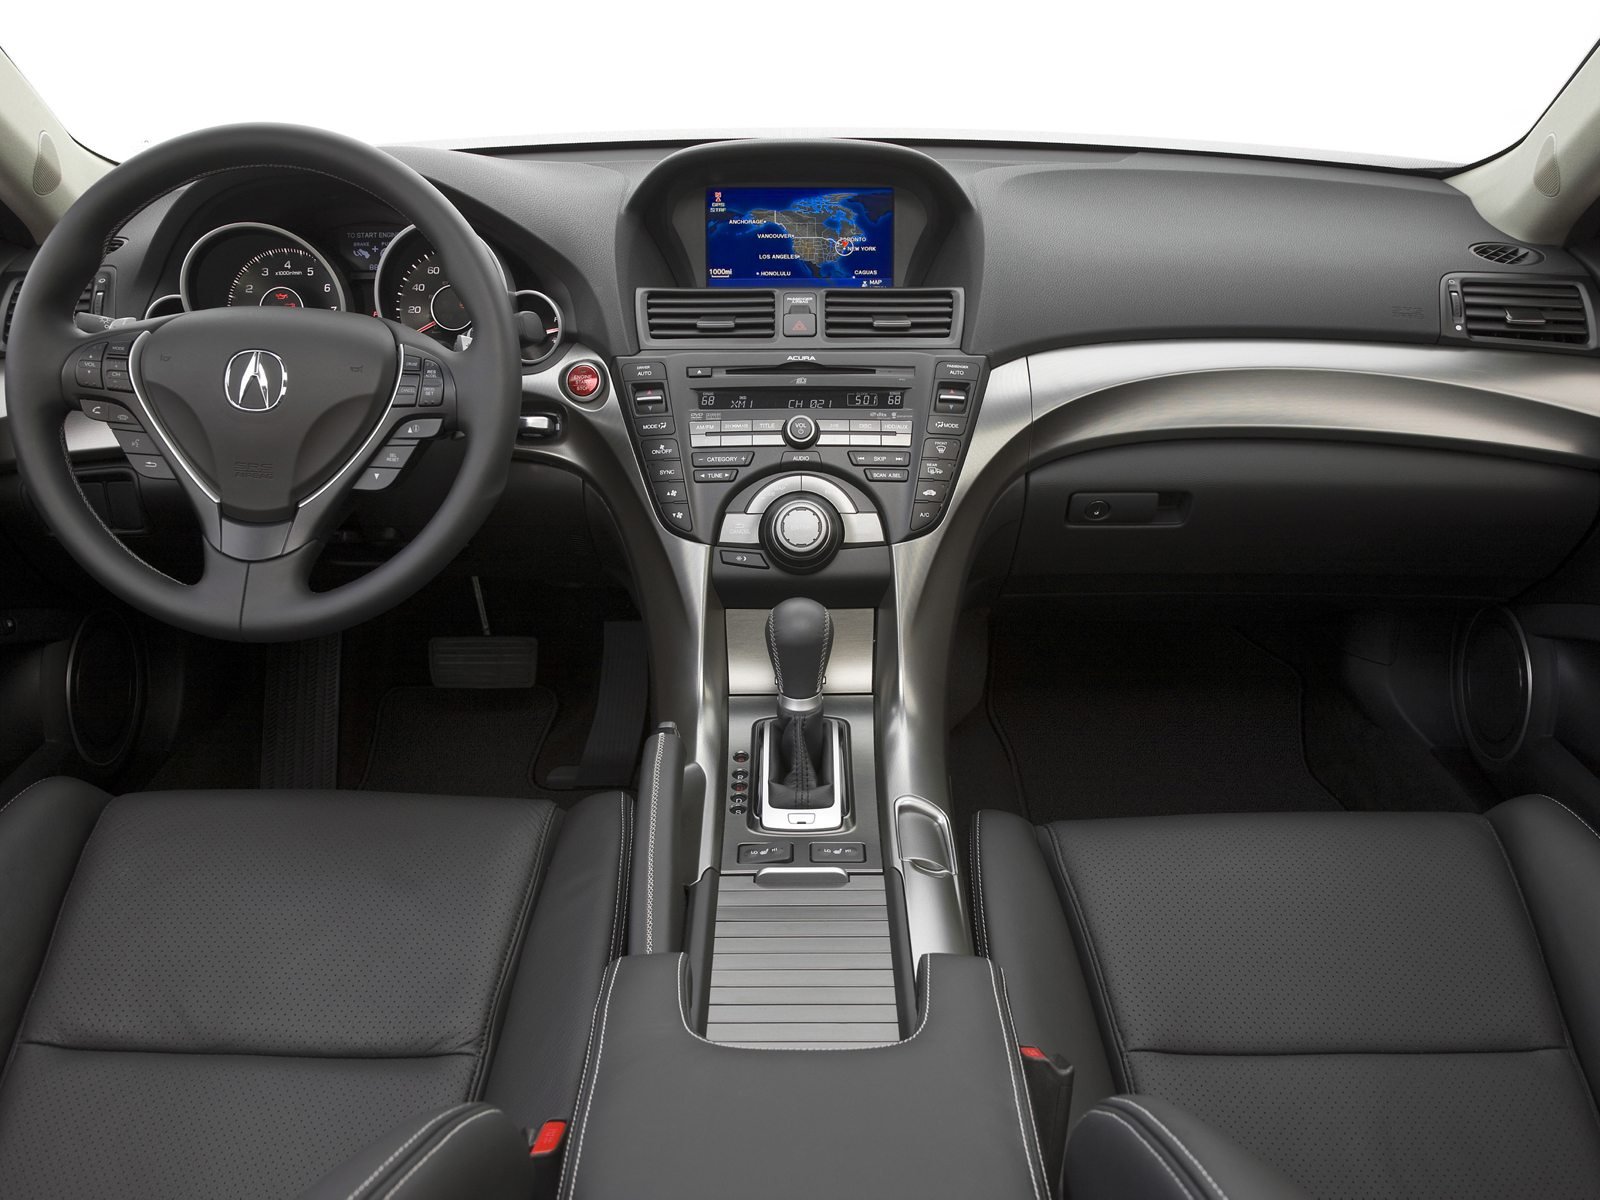 Tl With Technology Package And Parchment Interior Acura Tl Acura Acura Cars